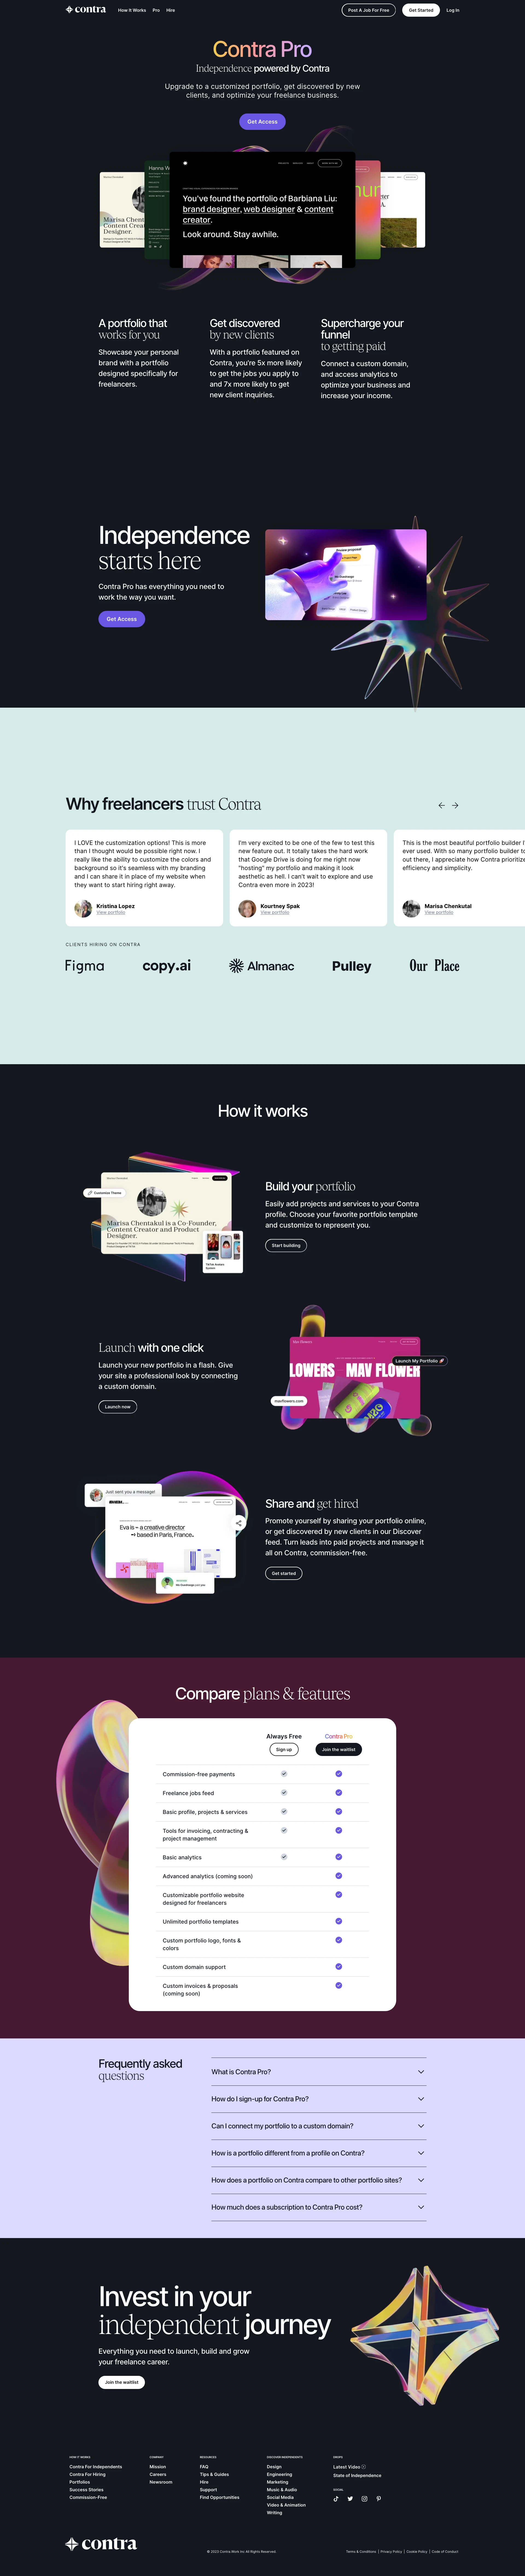 Contra Landing Page Example: Contra is the Independent-first, commission-free freelance marketplace shaping the future of work. You bring the skills, we provide the tools and opportunities.